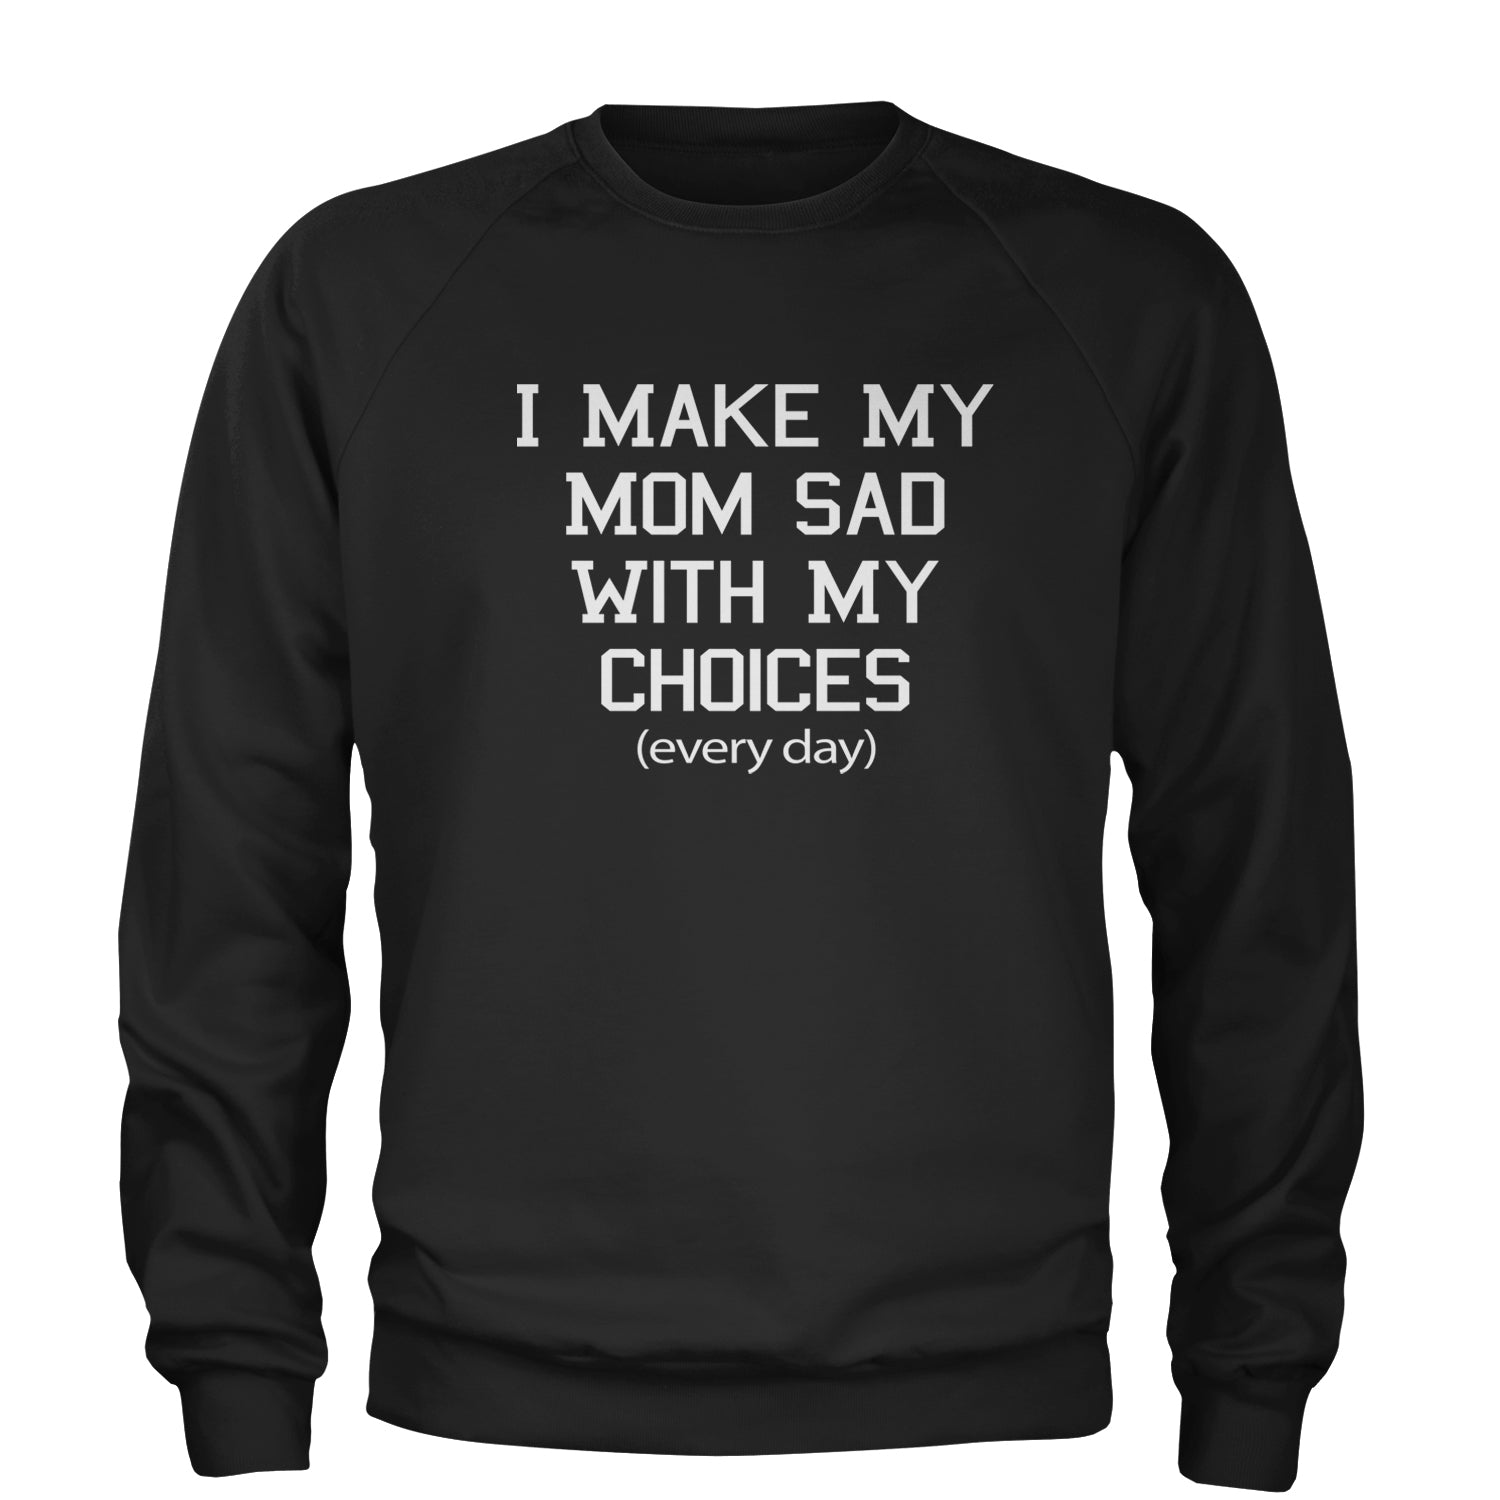 I Make My Mom Sad With My Choices Every Day Adult Crewneck Sweatshirt funny, ironic, meme by Expression Tees